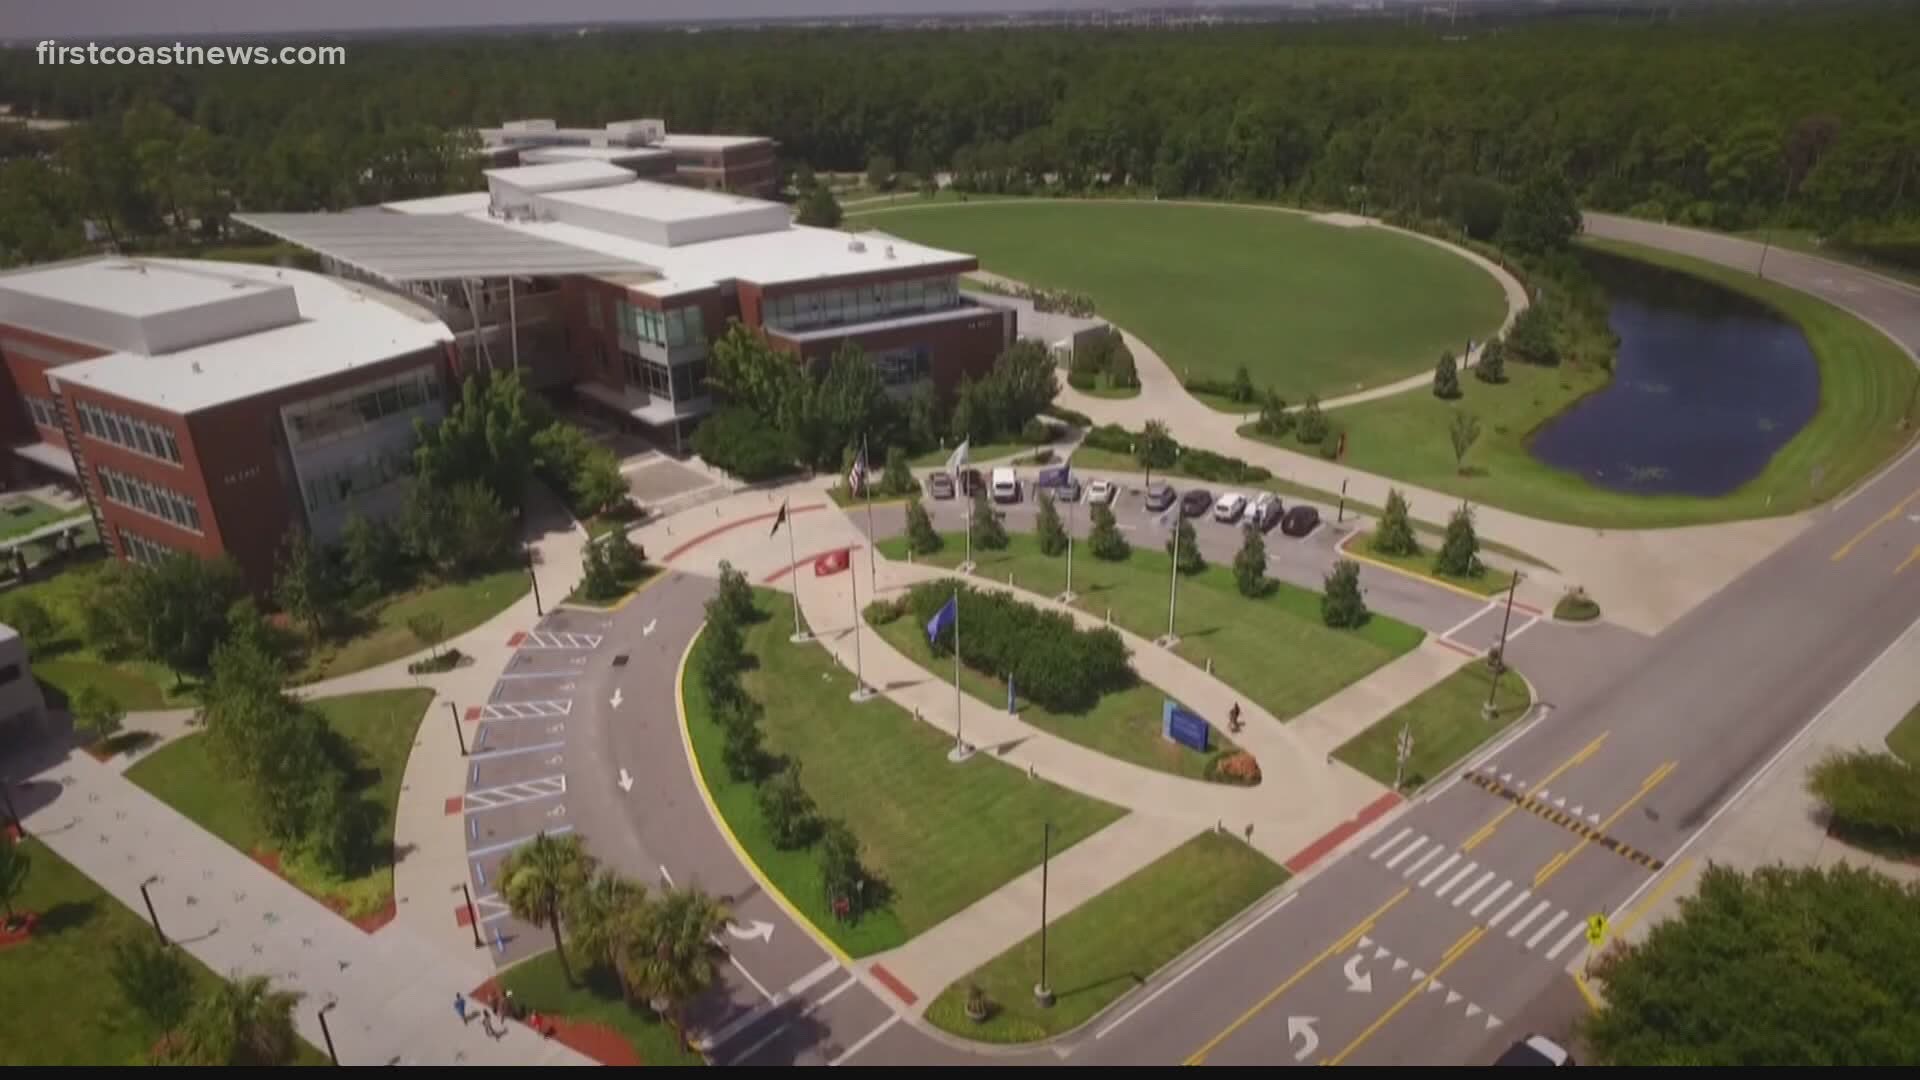 "To date, UNF has refunded 3,199 students totaling $2,941,187 for housing and refunded 2,802 students $1,564,257 for dining refunds," the school said in a statement.